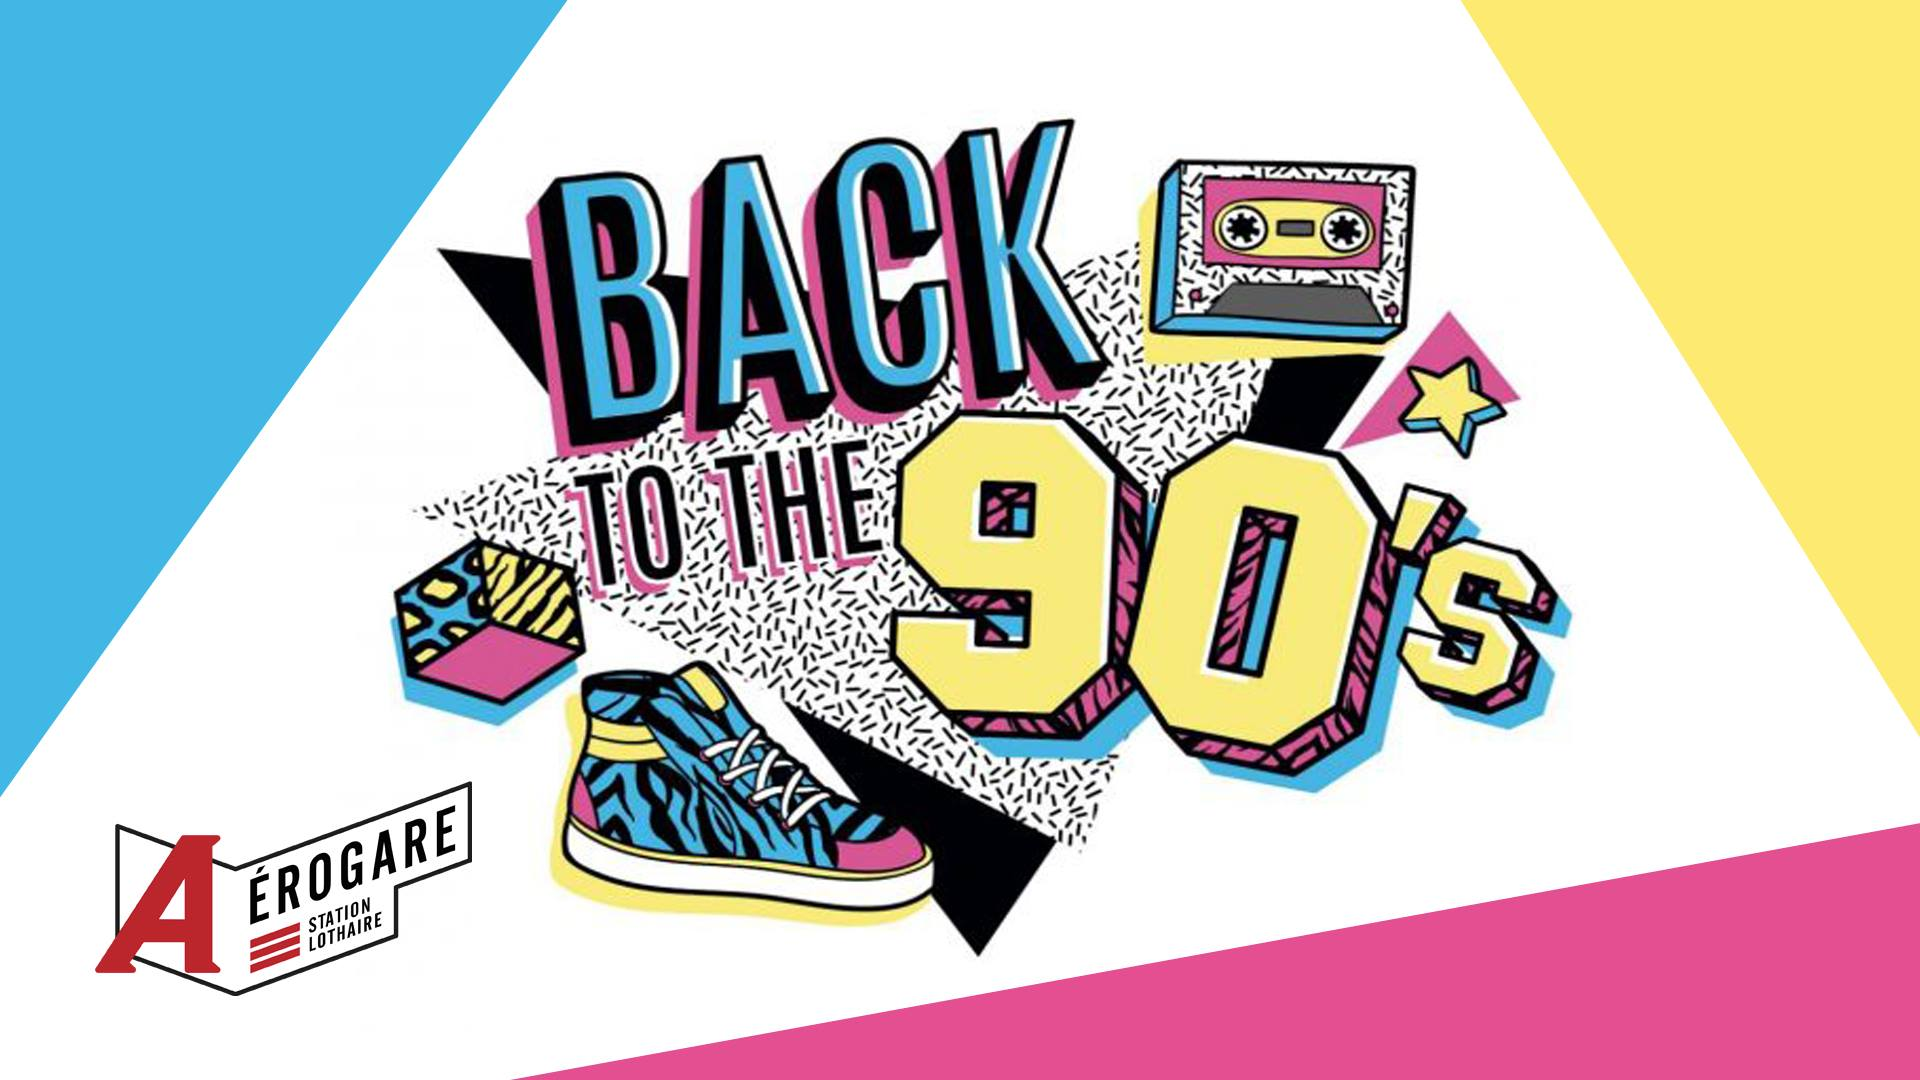 BACK TO 90´s